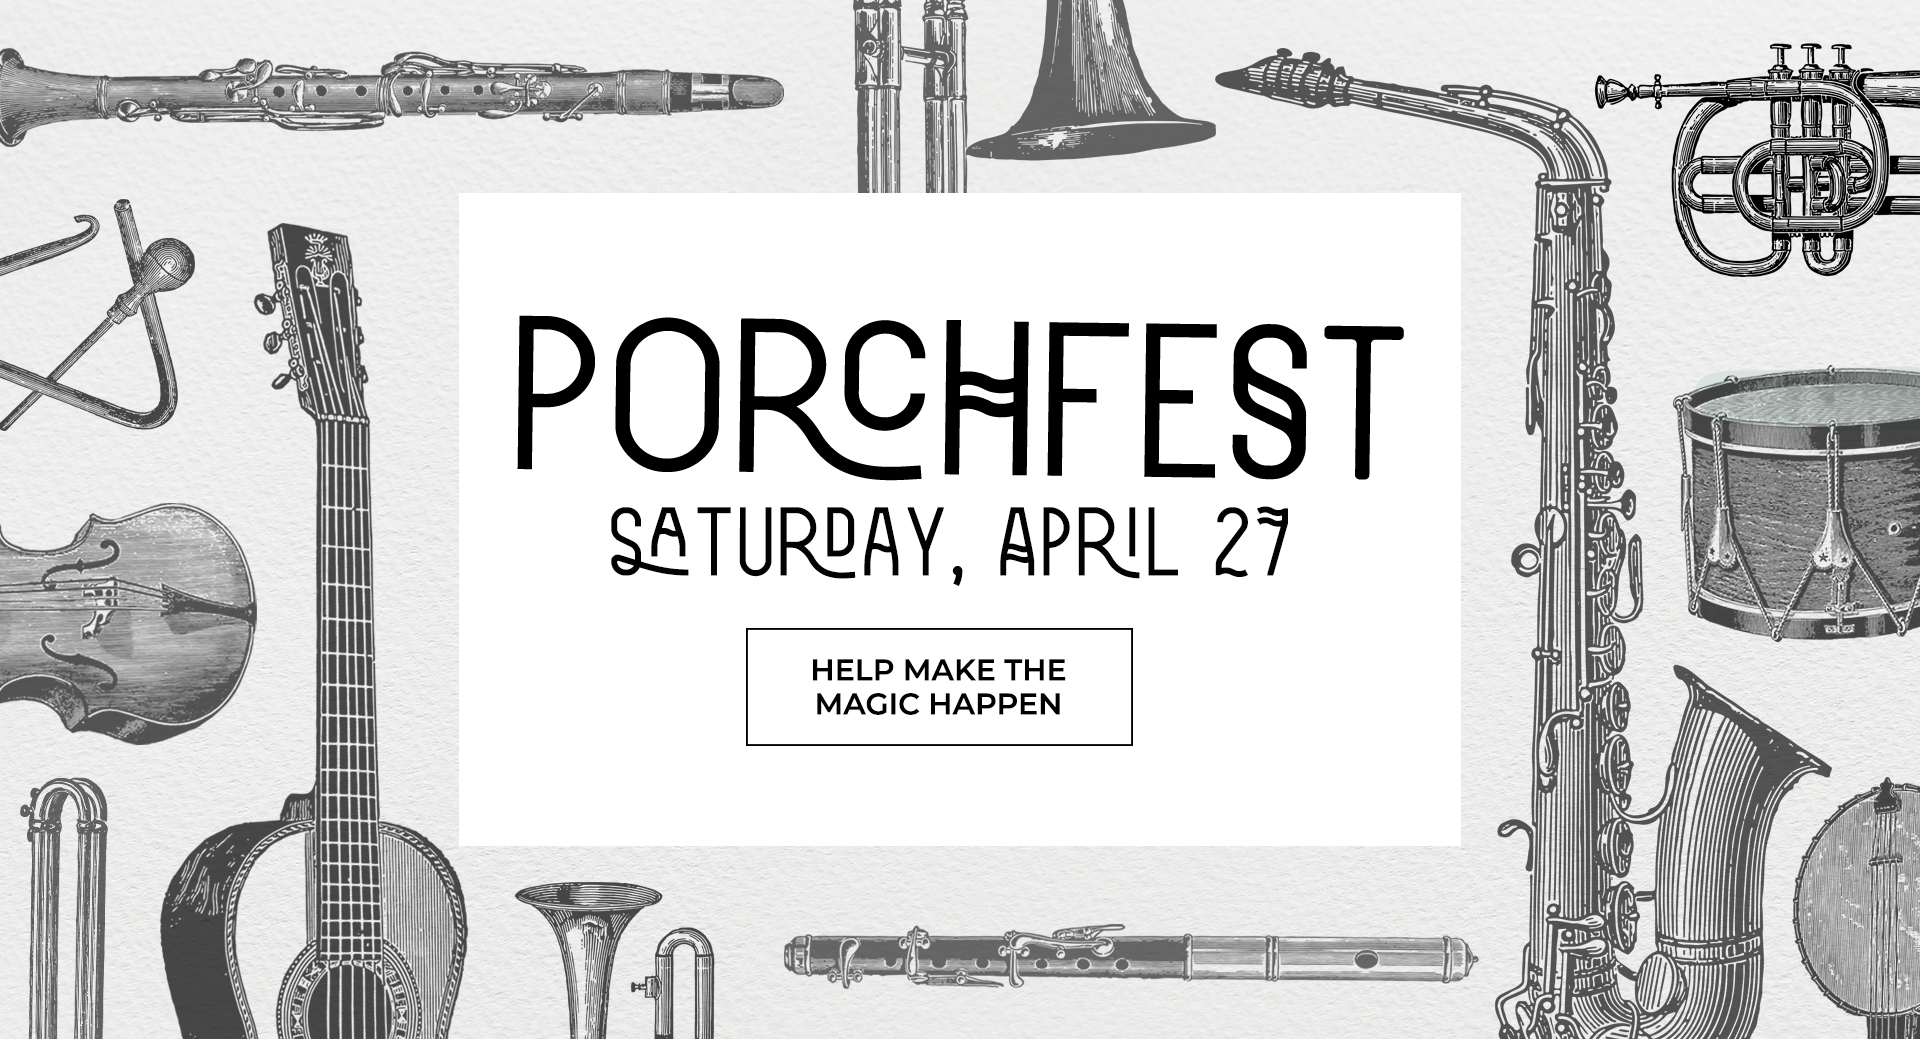 Princeton Porchfest Performer Applications